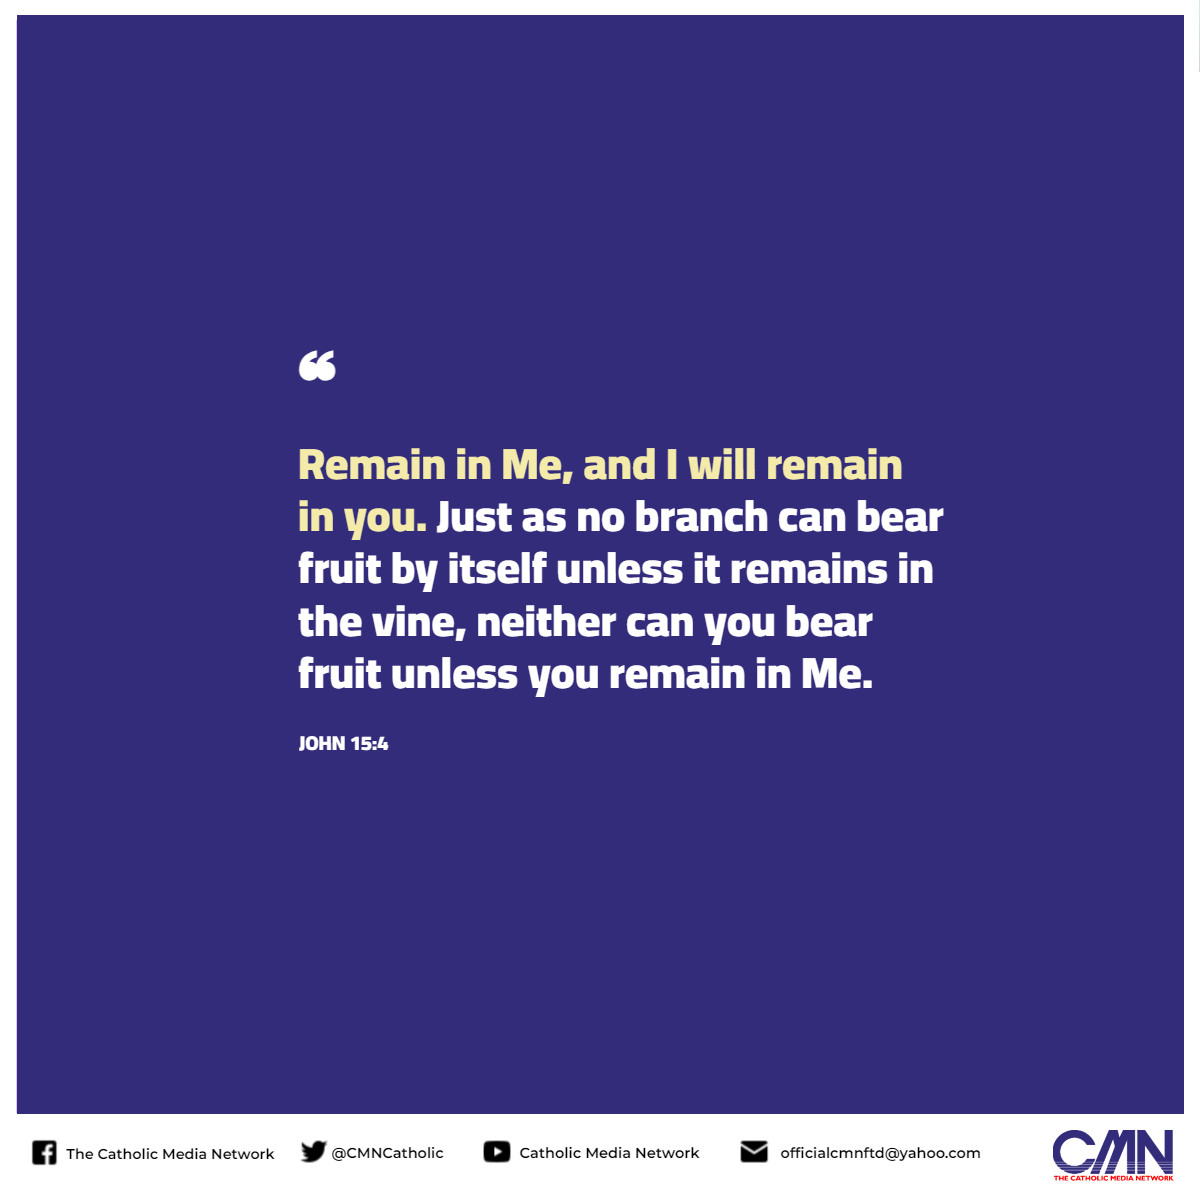 ❝ Remain in Me, and I will remain in you. Just as no branch can bear fruit by itself unless it remains in the vine, neither can you bear fruit unless you remain in Me. #John 15:4

#BlessedThursday #cmn